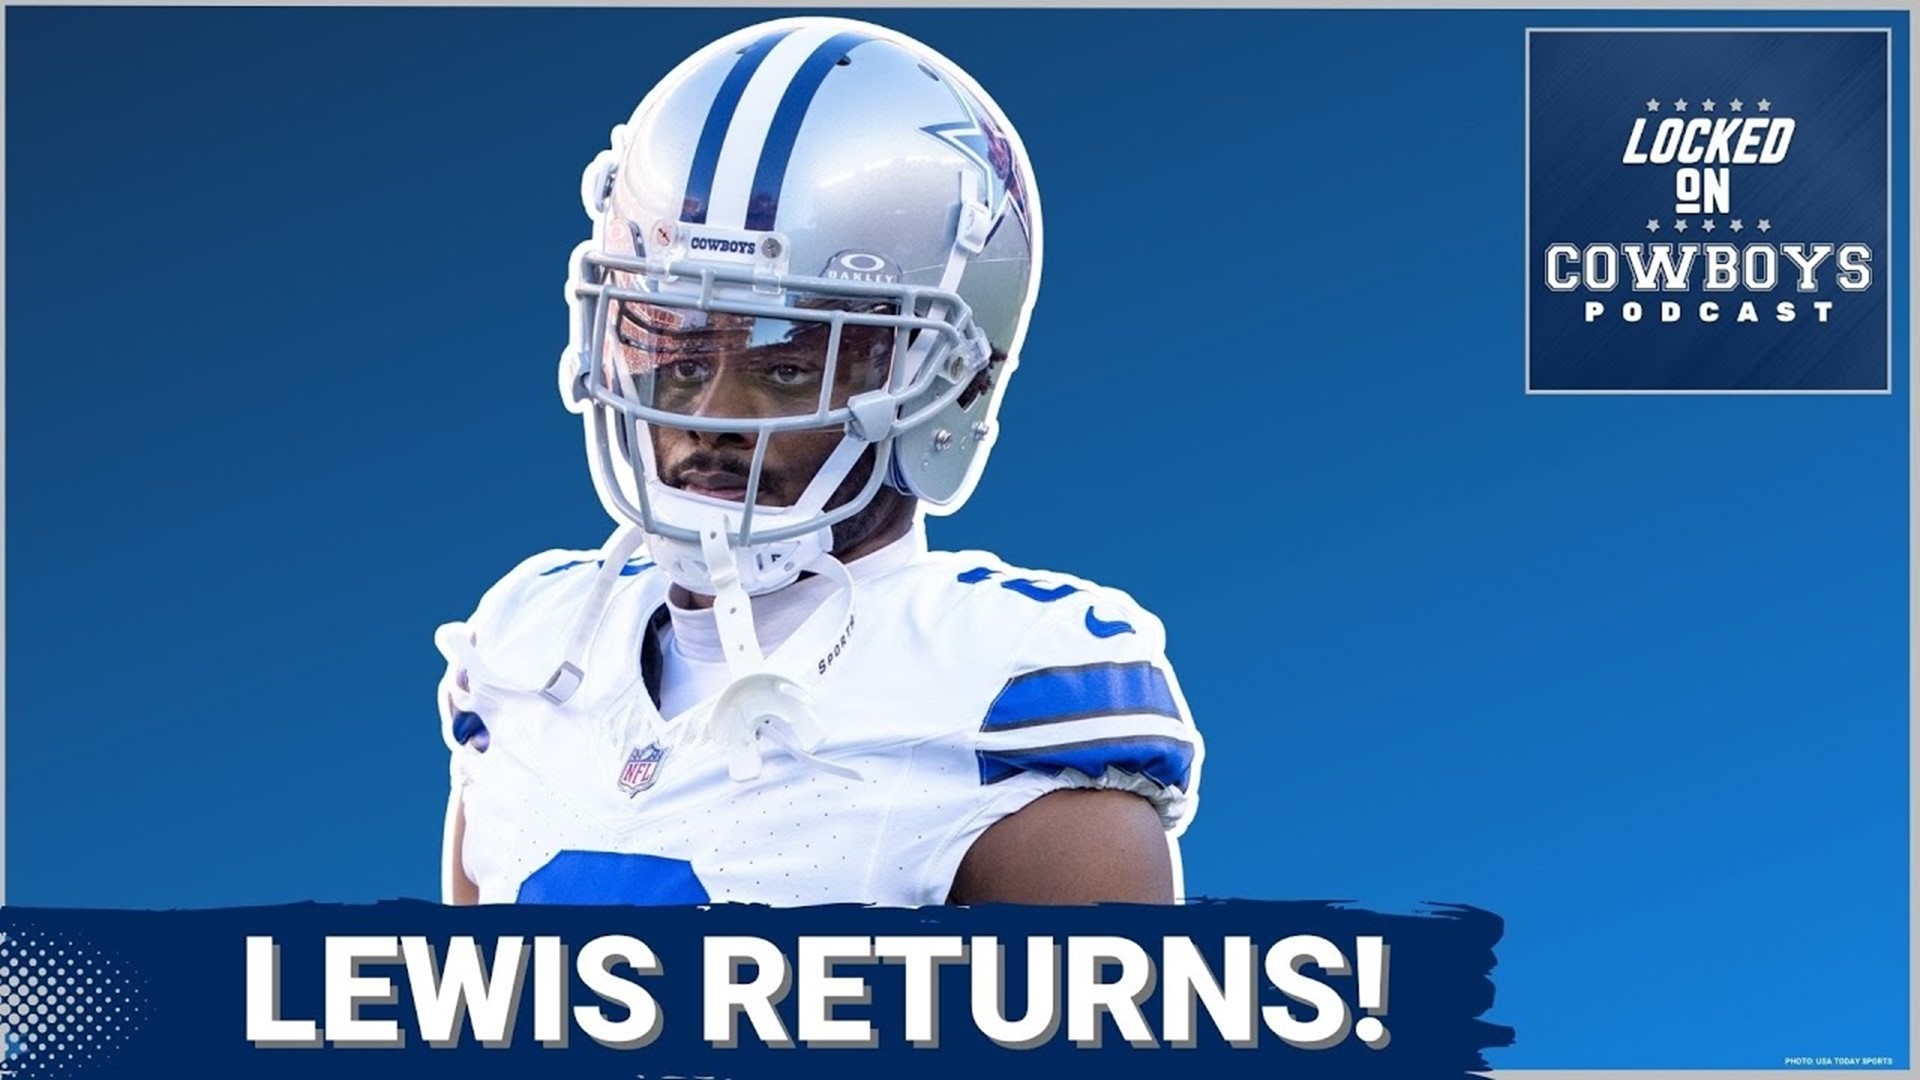 The Dallas Cowboys have re-signed Jourdan Lewis, locking him up to a one-year deal. Lewis is expected to start in the slot again in Mike Zimmer's defense.